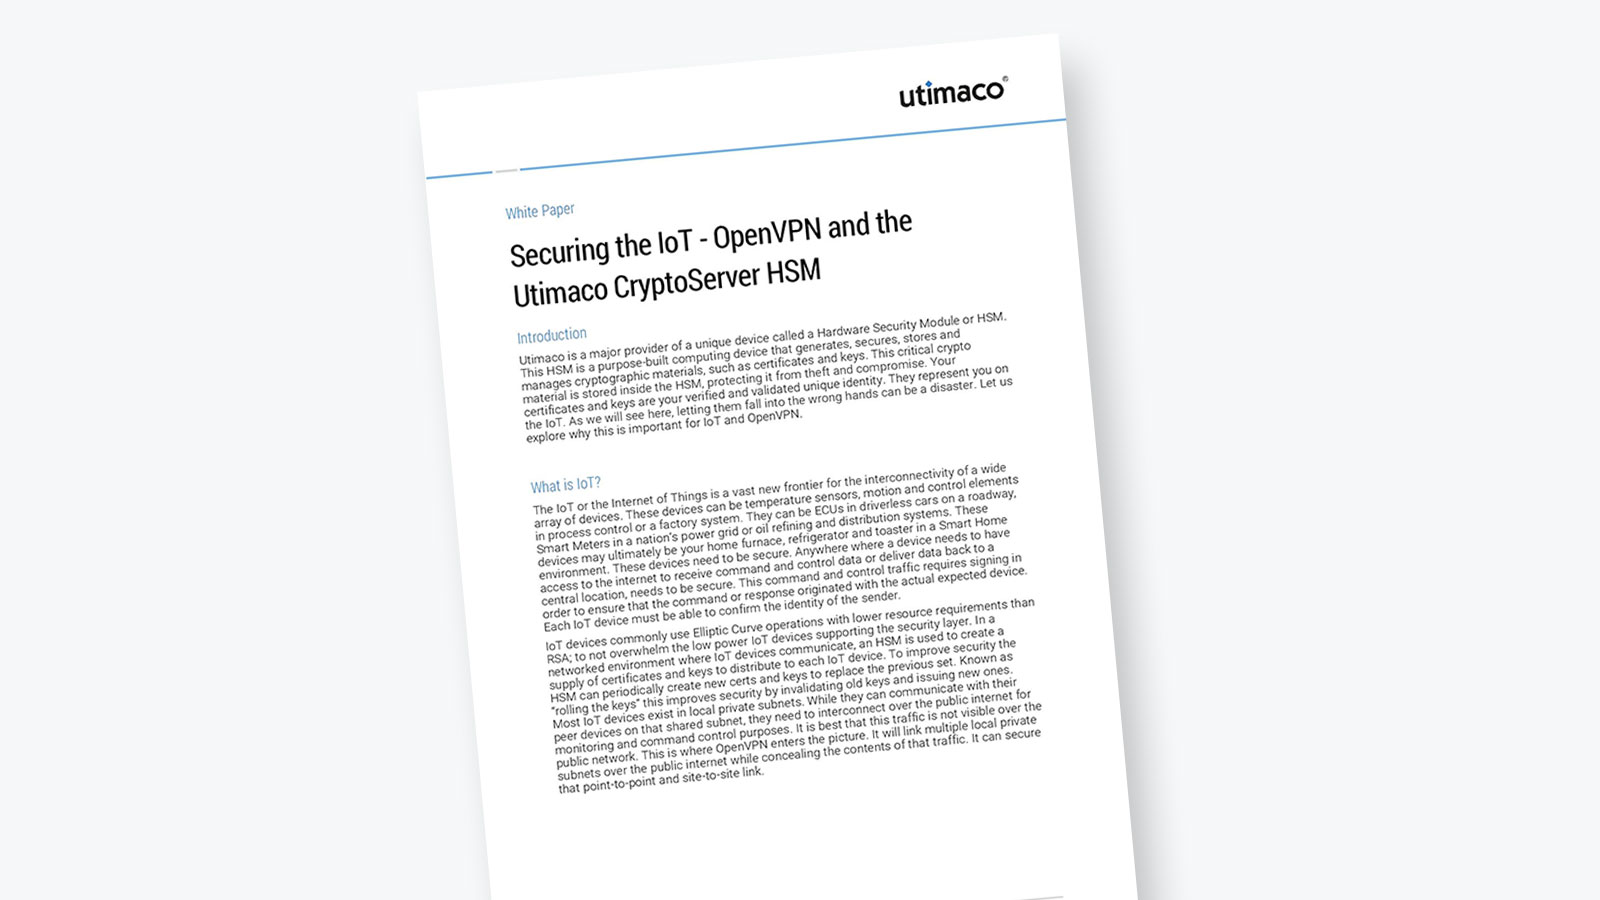 How to Secure the IoT through OpenVPNs and the Utimaco CryptoServer HSM